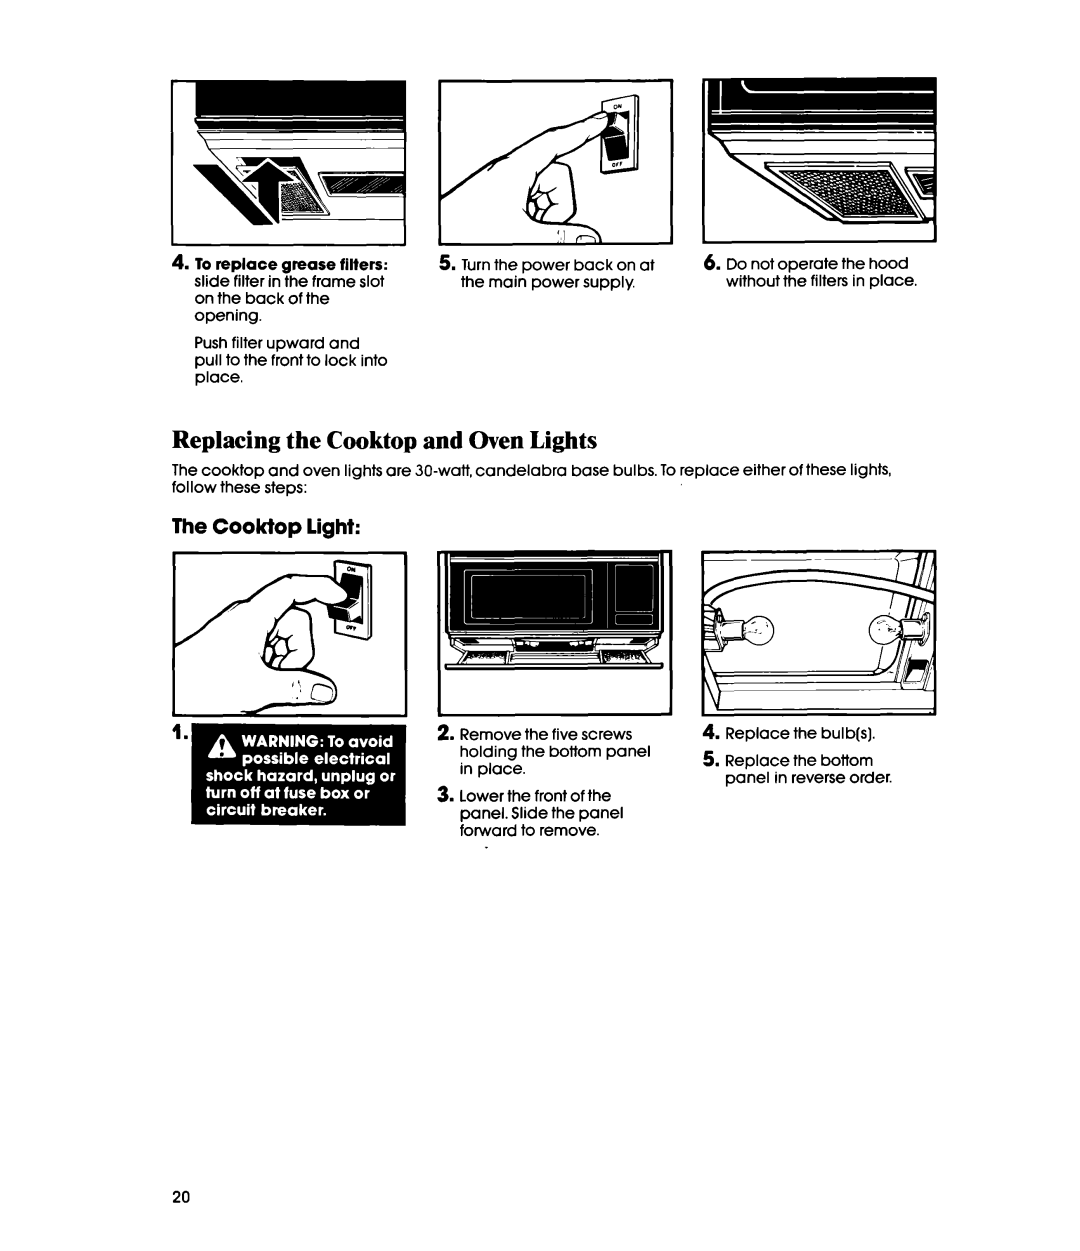 Whirlpool MH6600XV, MH6600XW manual Replacing the Cooktop and Oven Lights, The Cooktop light, grease filters 